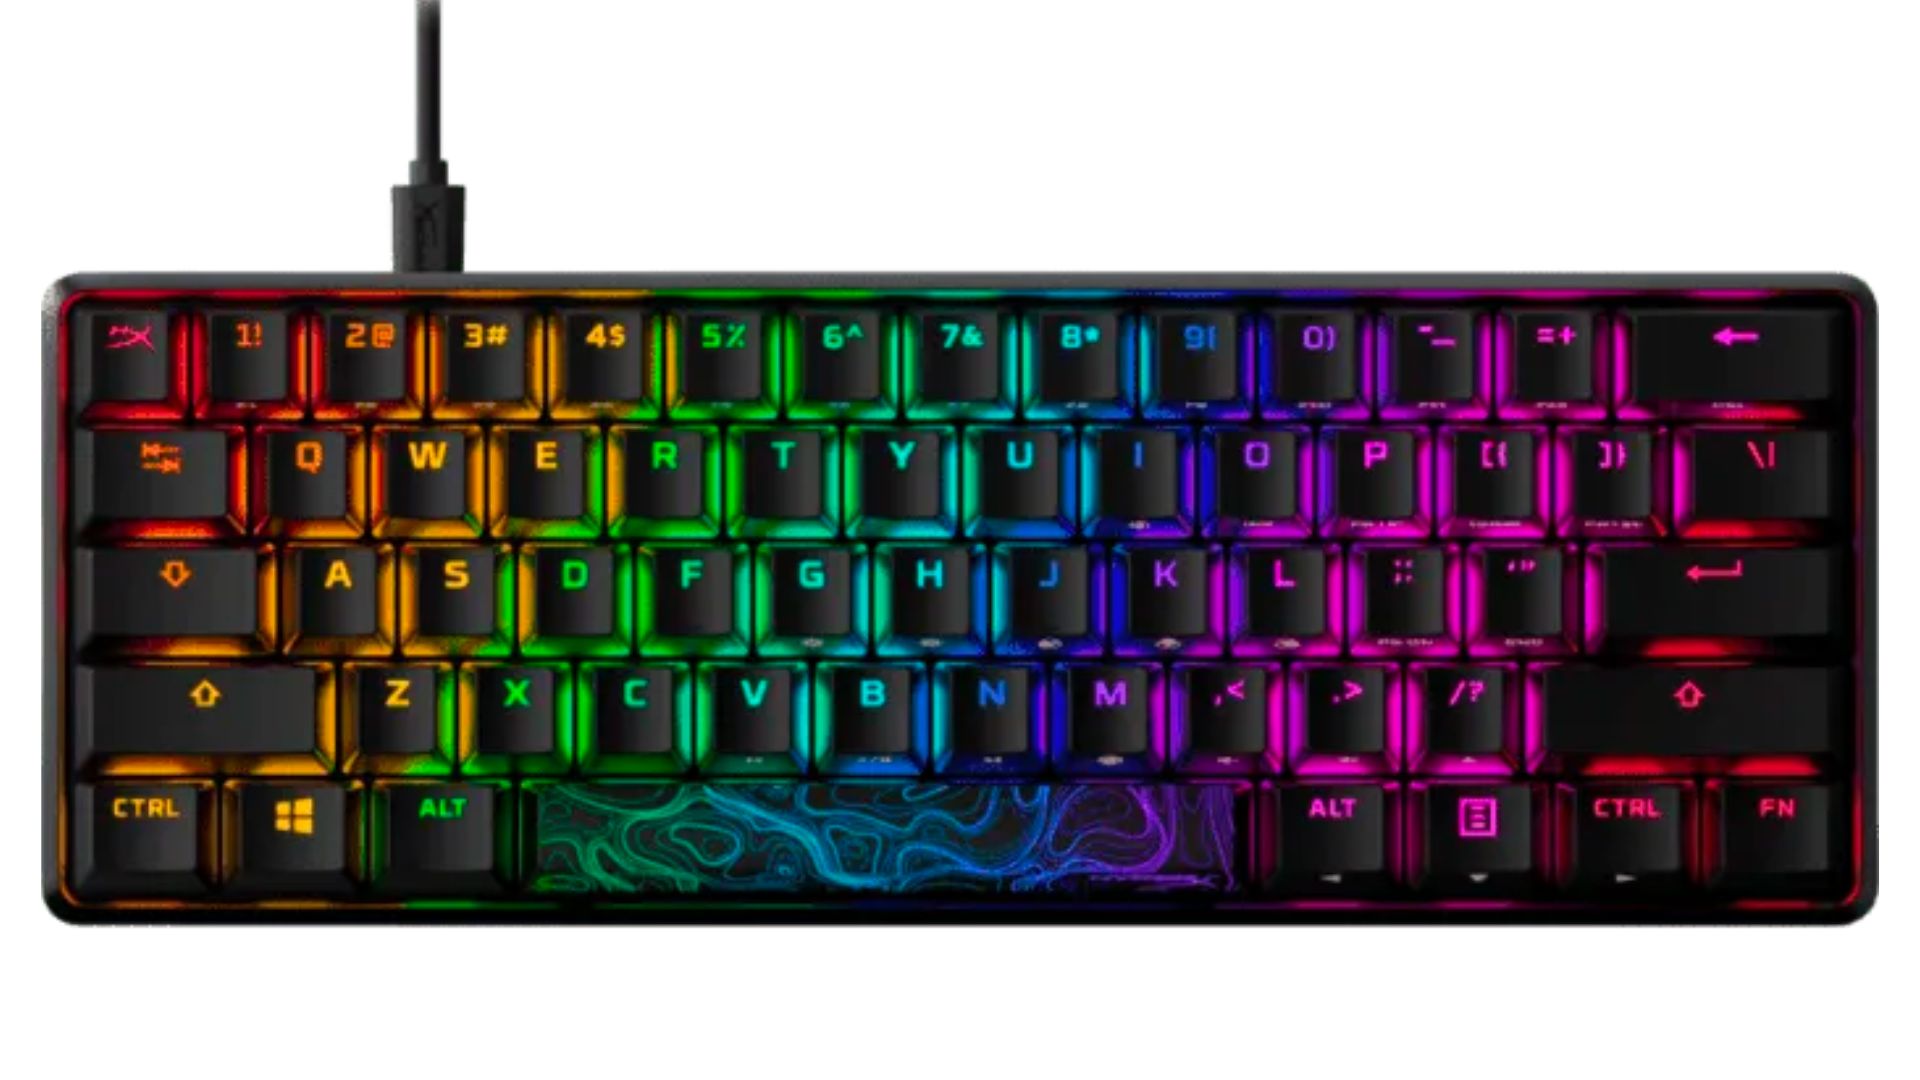 Budget gaming PC accessories: Keyboards under $200